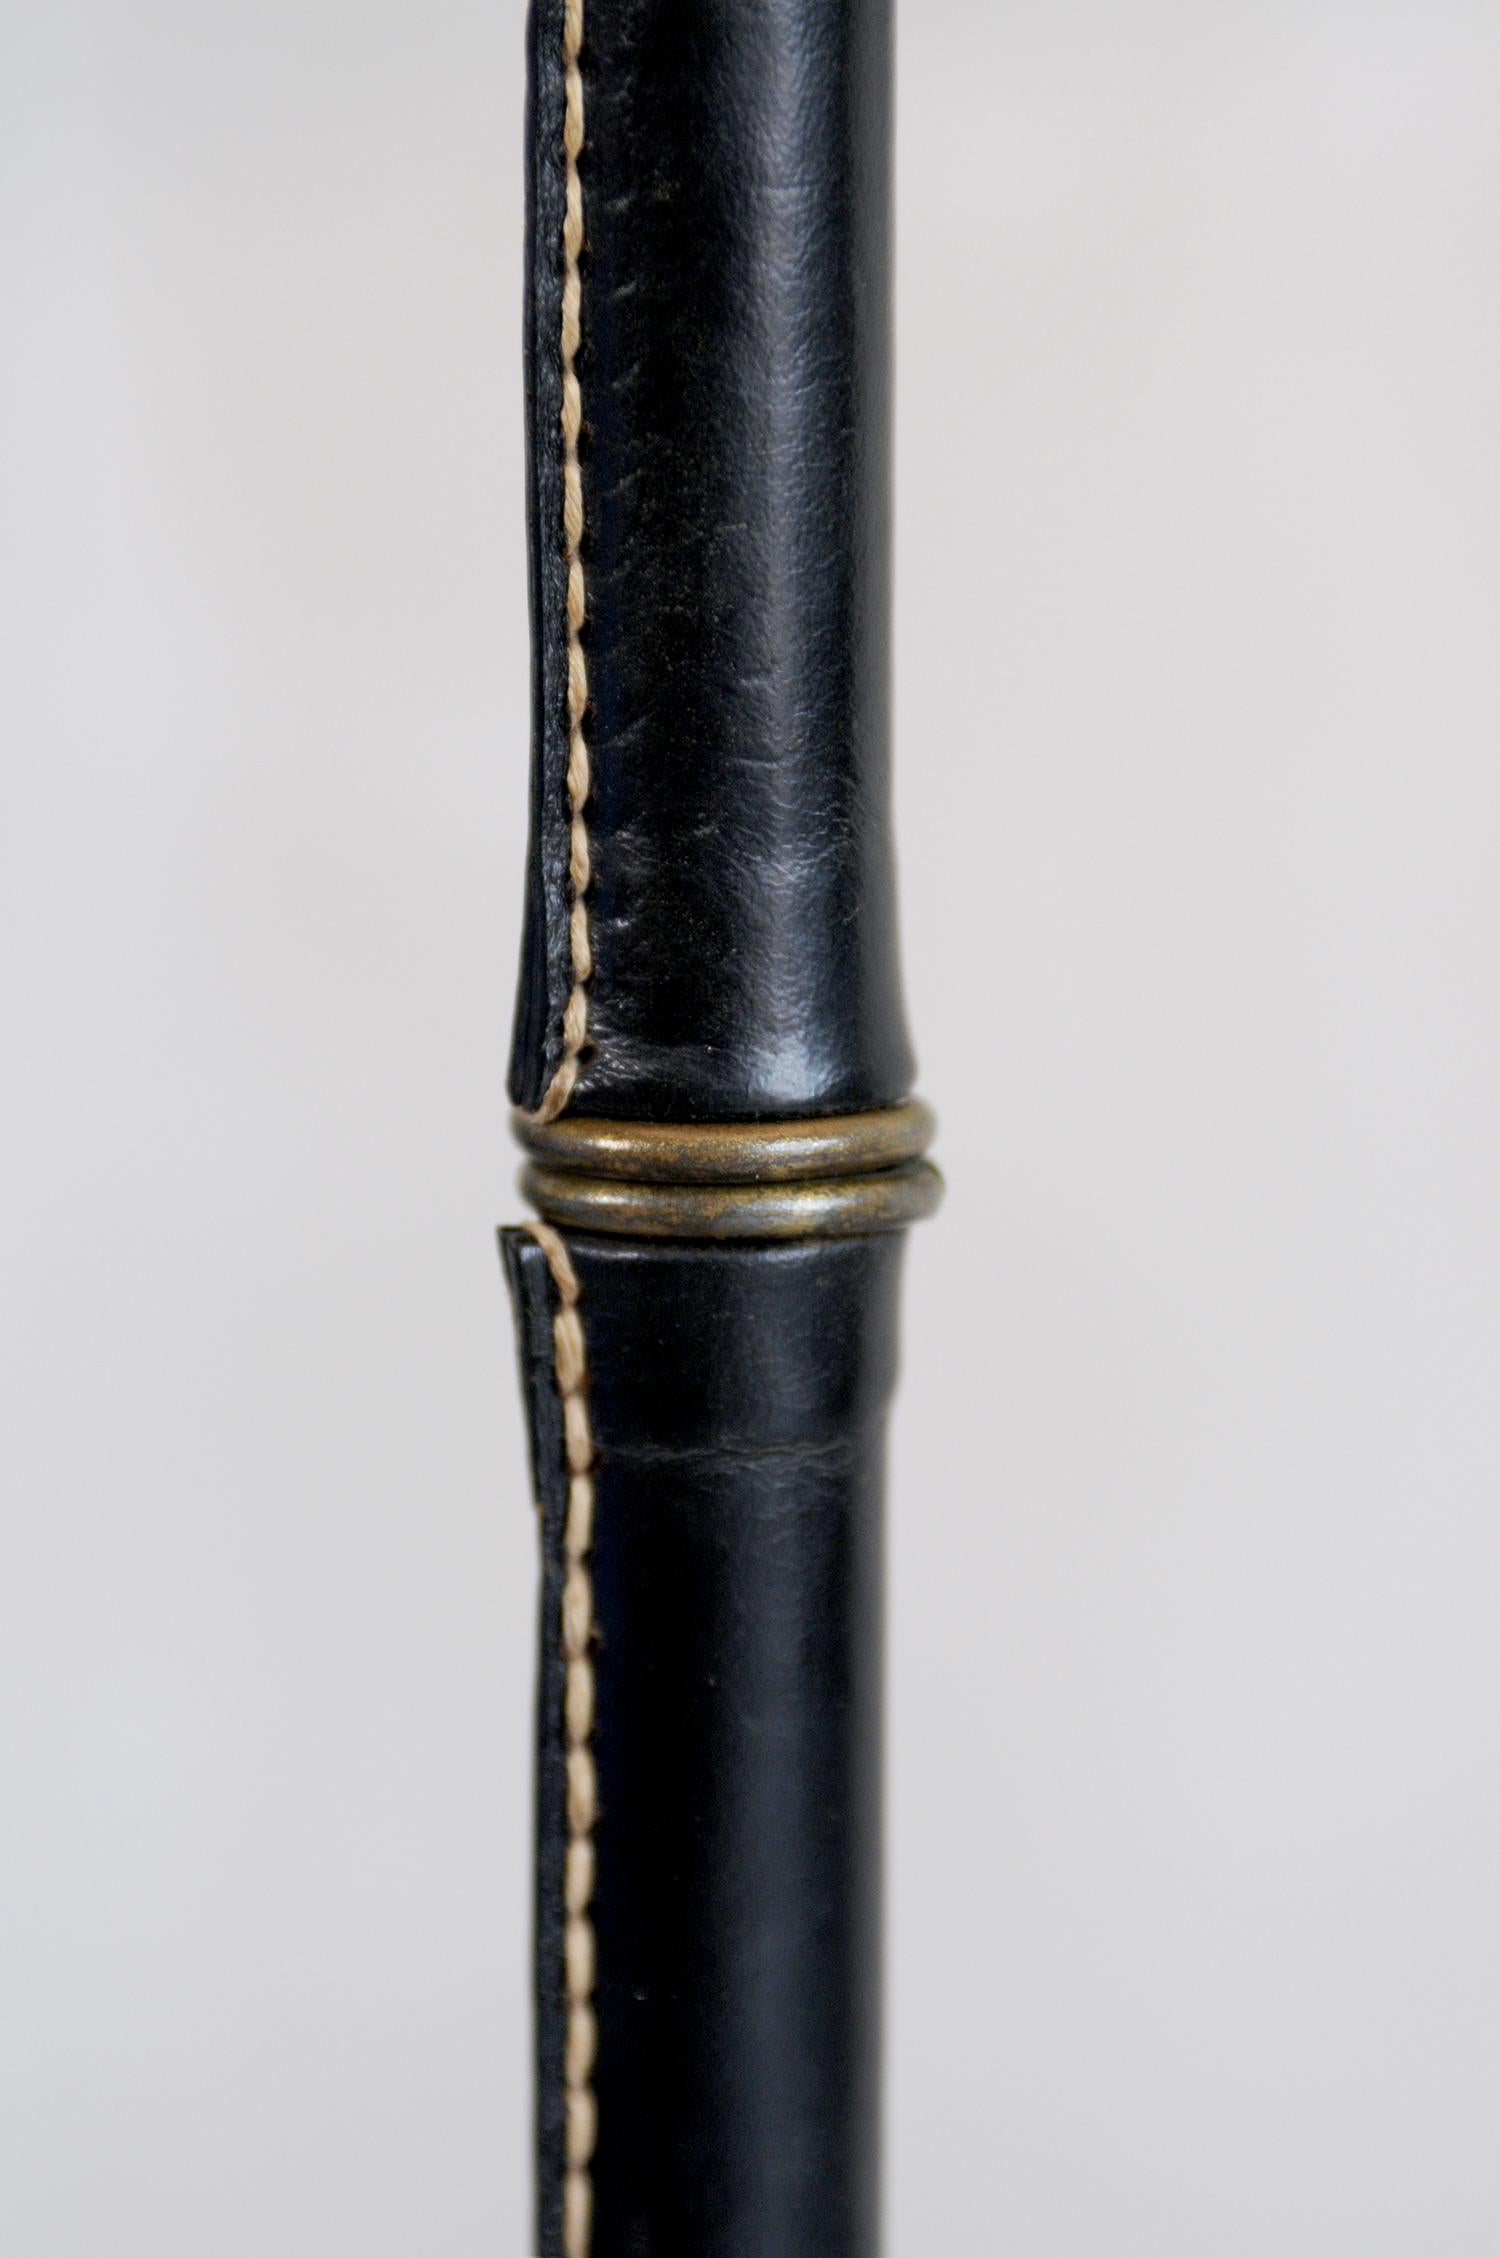 Tripod floor lamp covered in black leather and ringed with brass rings by Jacques Adnet, France 1950.
Very good original condition.
At your request, a competitive freight quote will be provided.